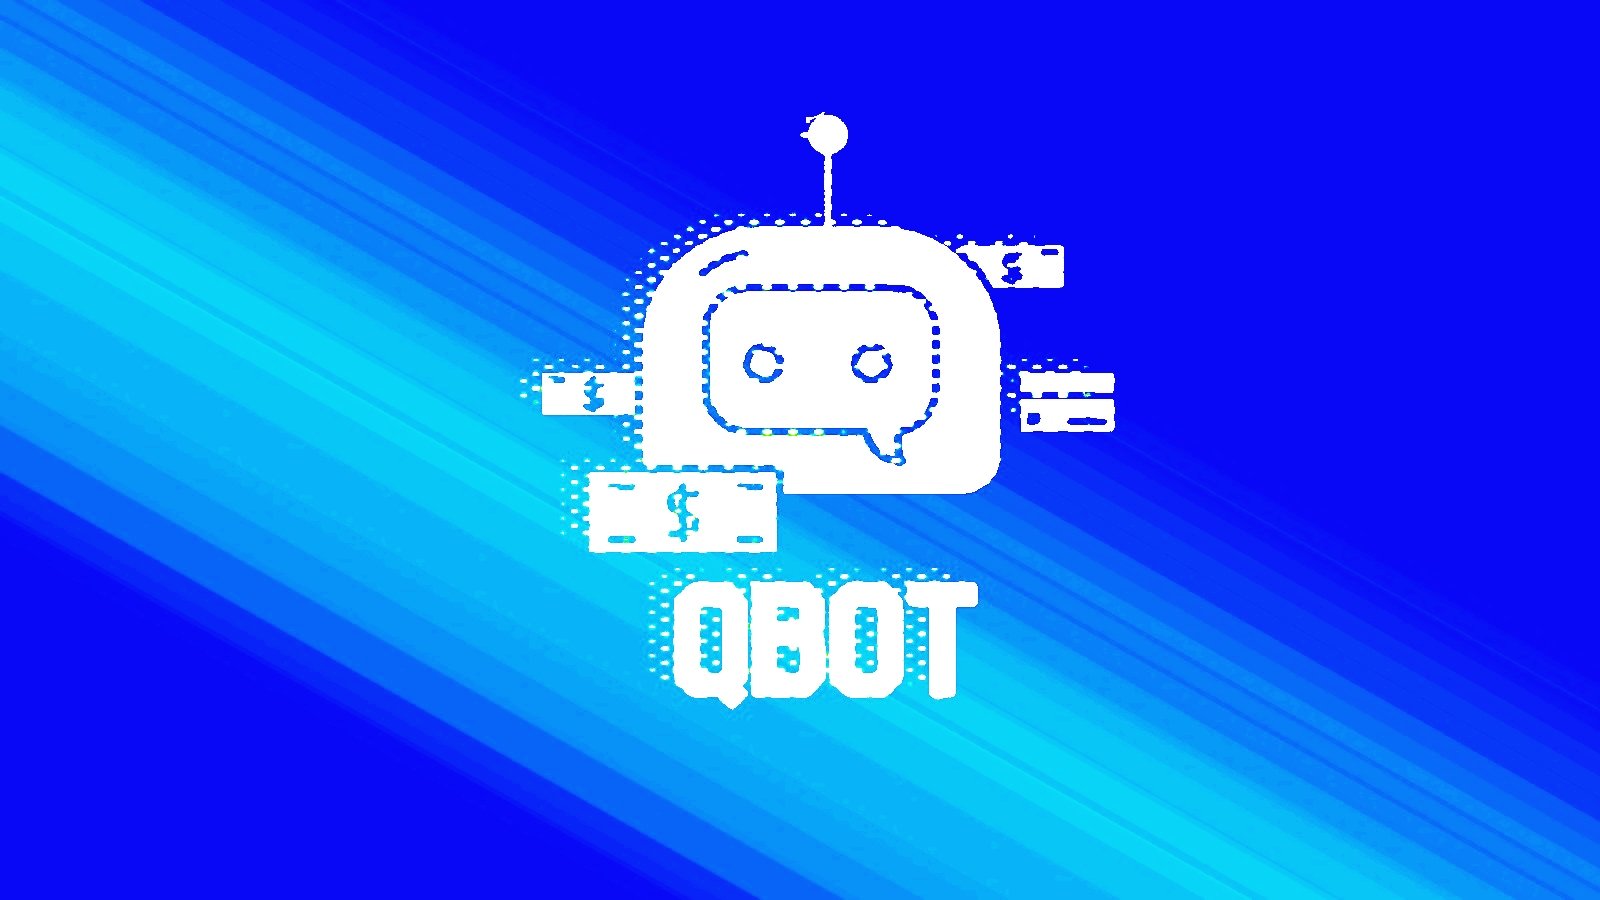 Qbot malware returns in campaign targeting hospitality industry